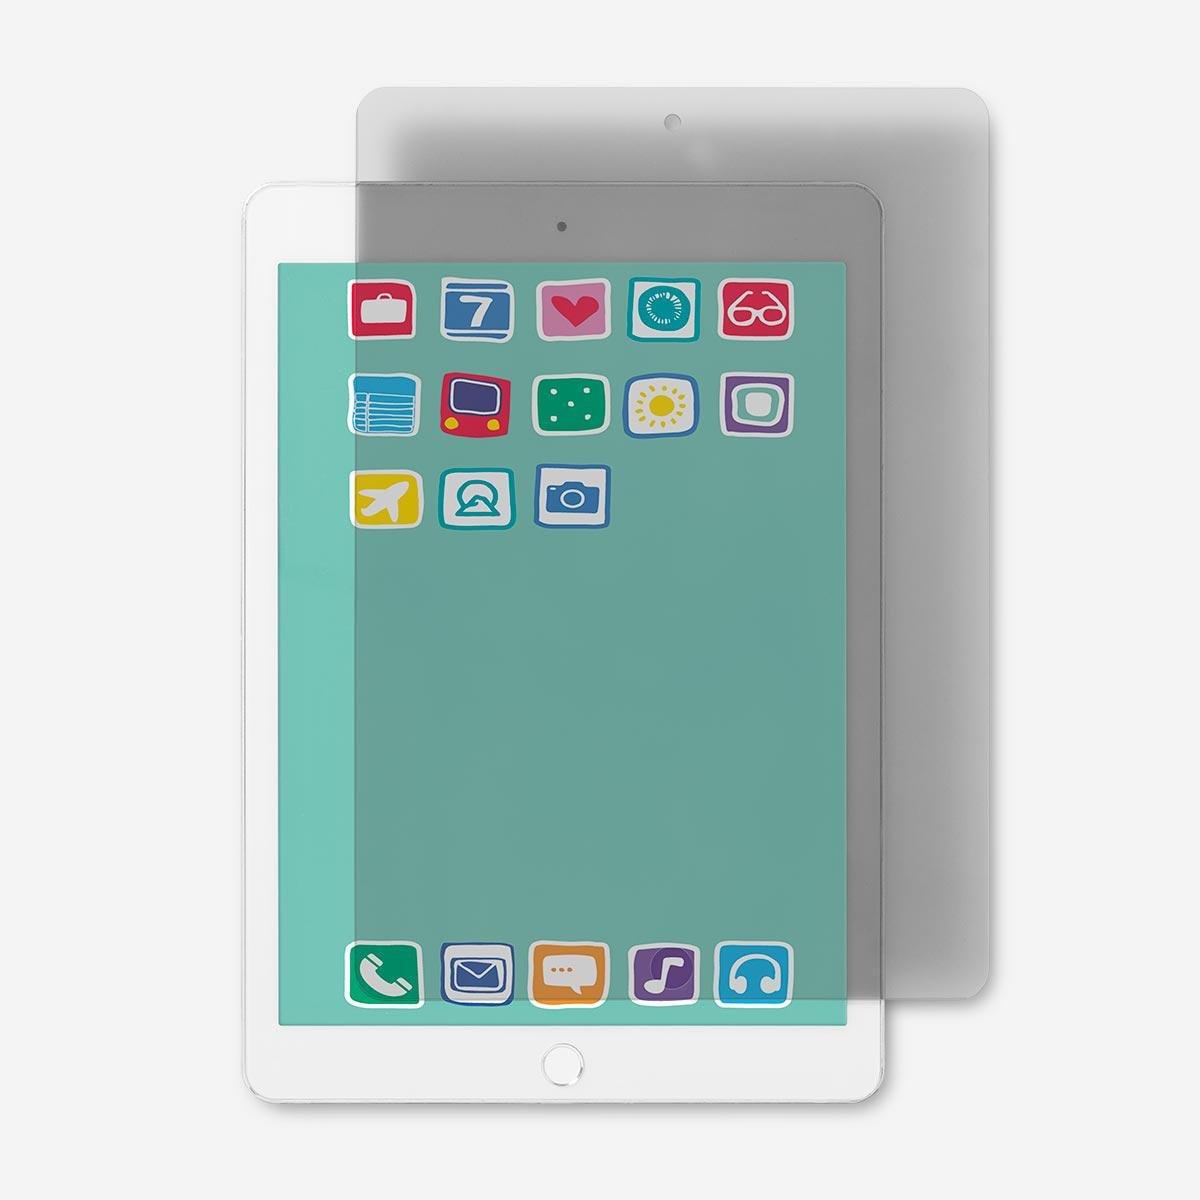 Transaparent screen protector with privacy filter. fits ipad 5, 6